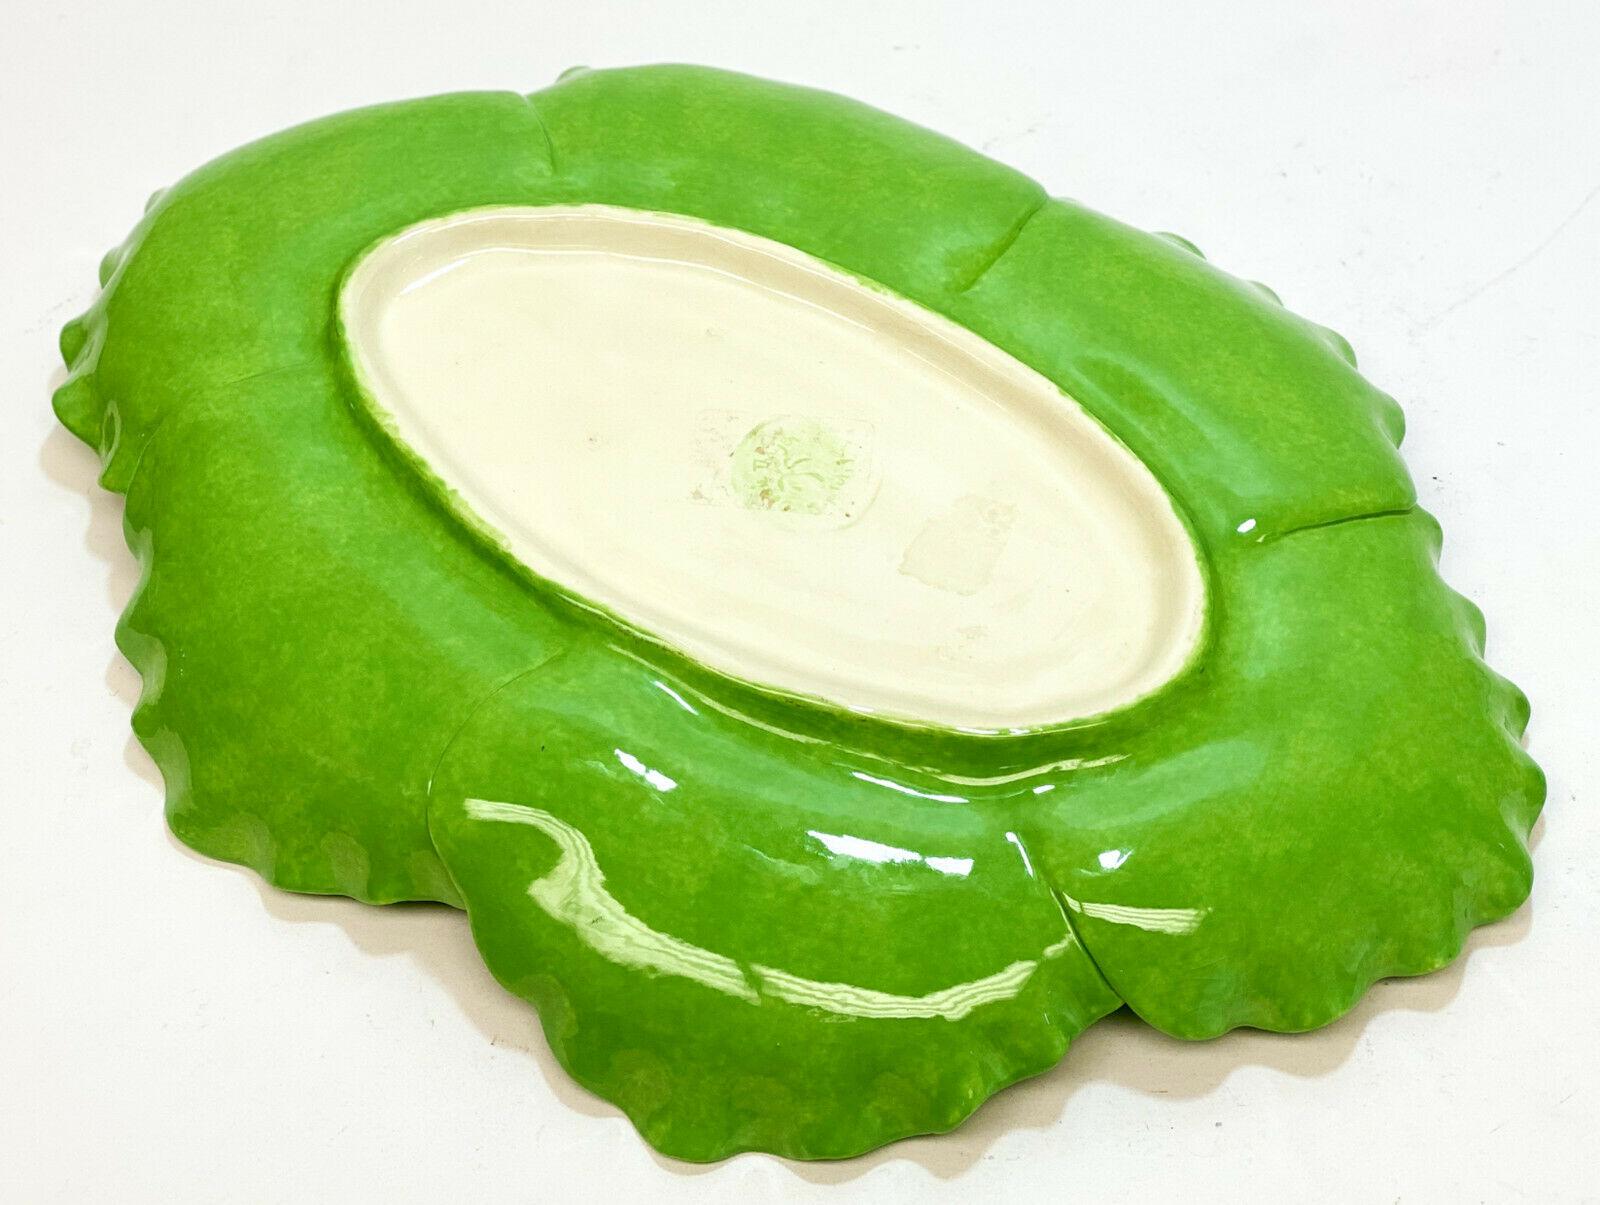 Dodie Thayer Jupiter Lettuce Leaf Handmade Earthenware Tray In Excellent Condition For Sale In Pasadena, CA